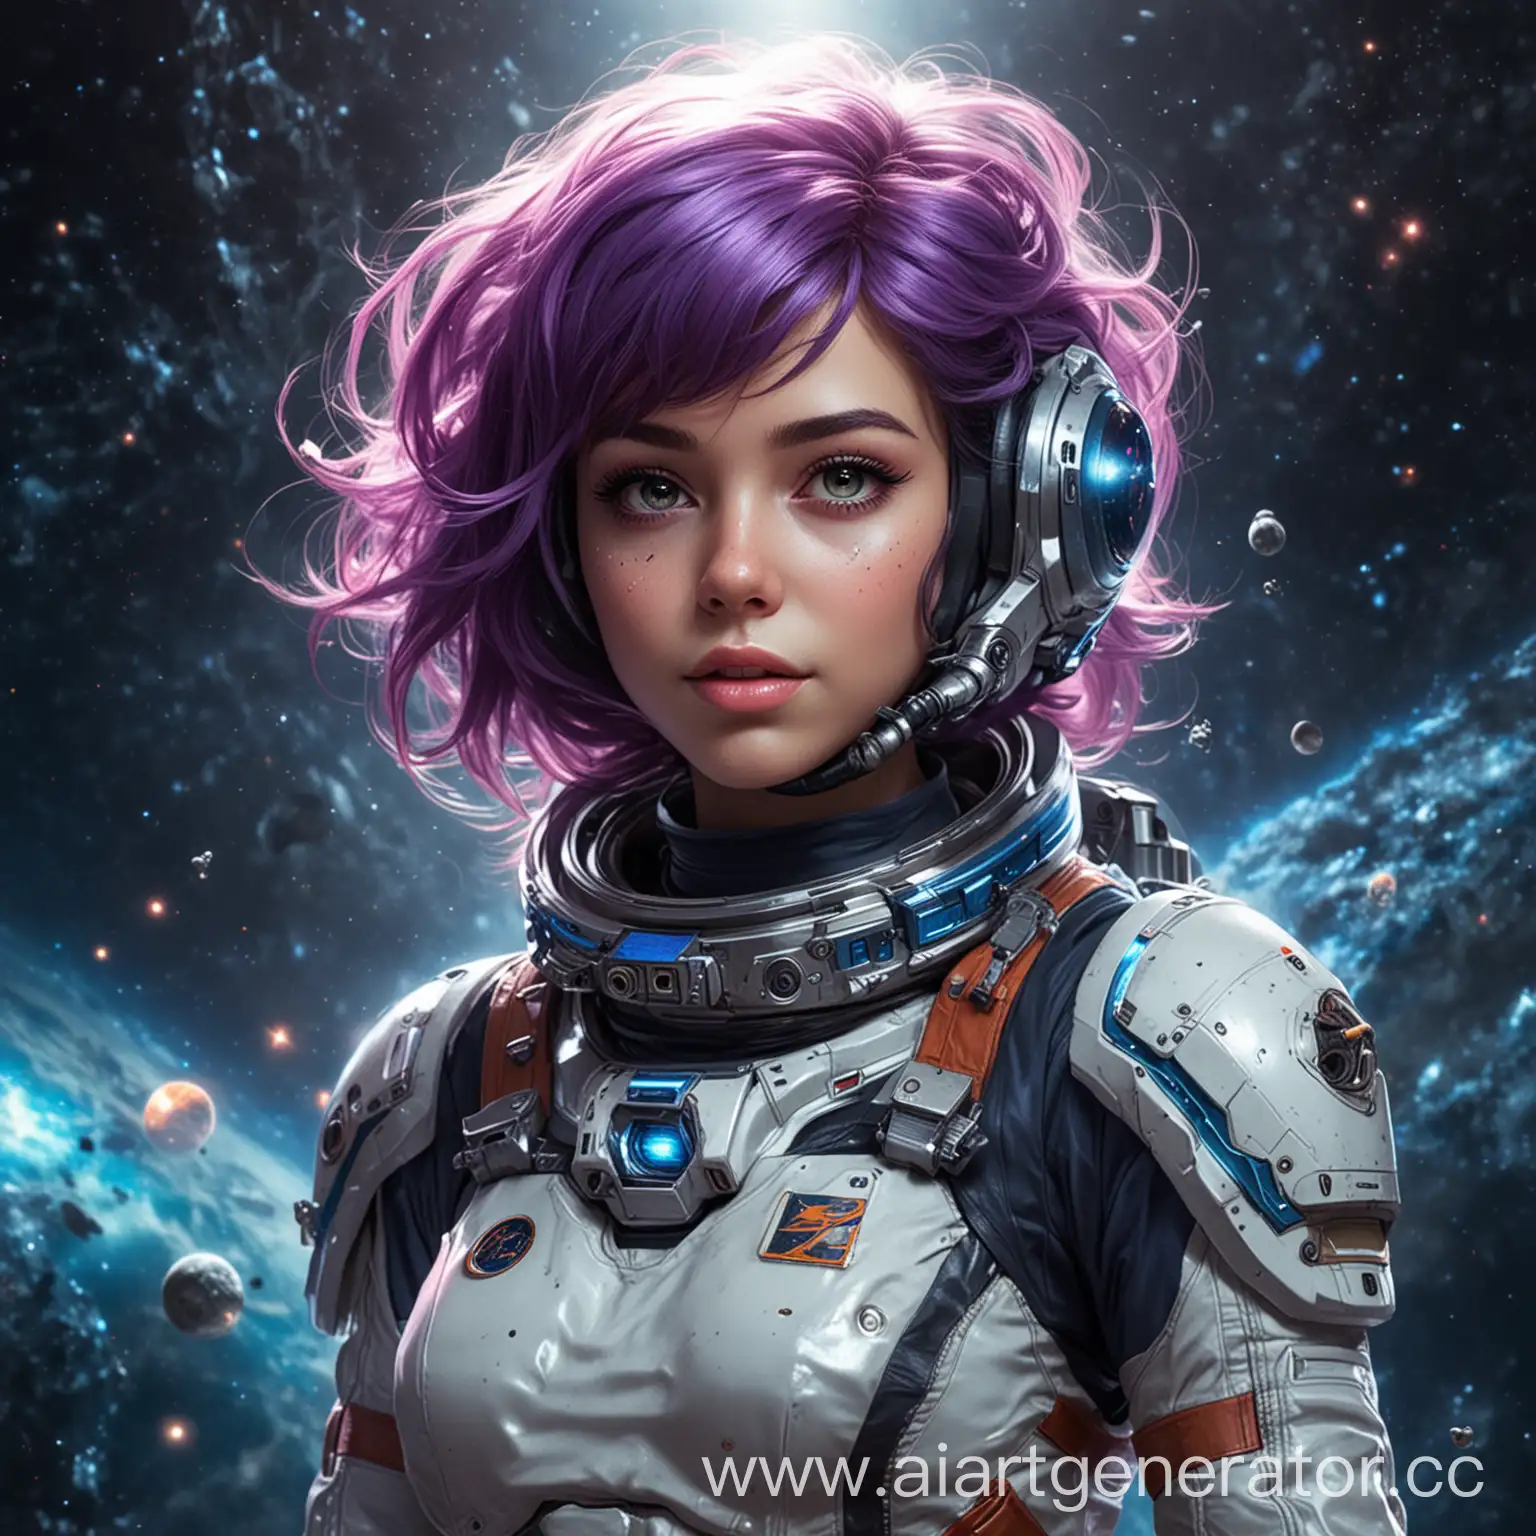 Futuristic-Space-Girl-Exploring-Unknown-Galaxies